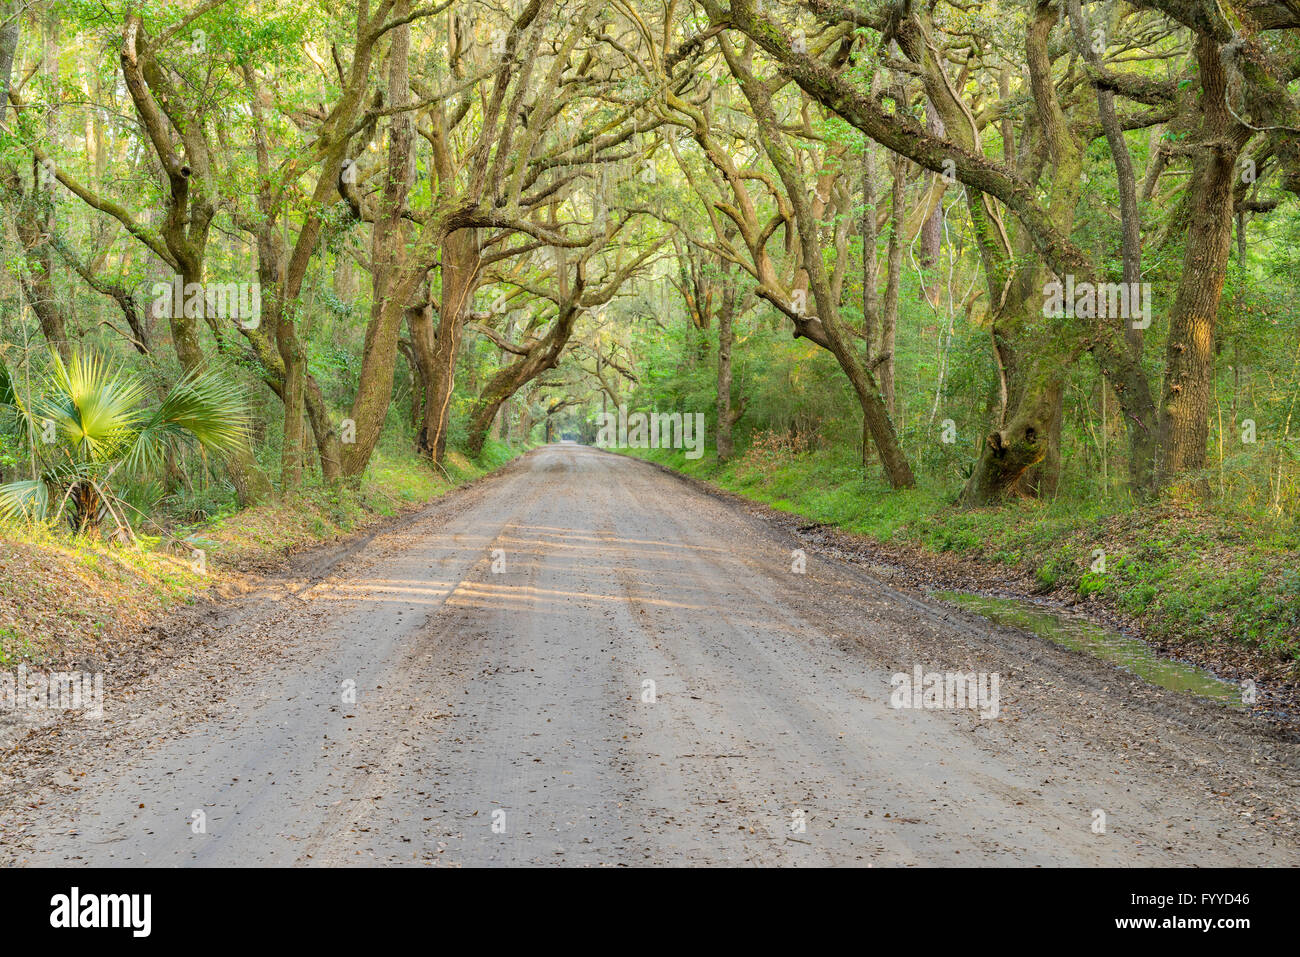 Dirt road passes under canopy of live oak trees and lush green vegetation in the deep south of the United States. Stock Photo